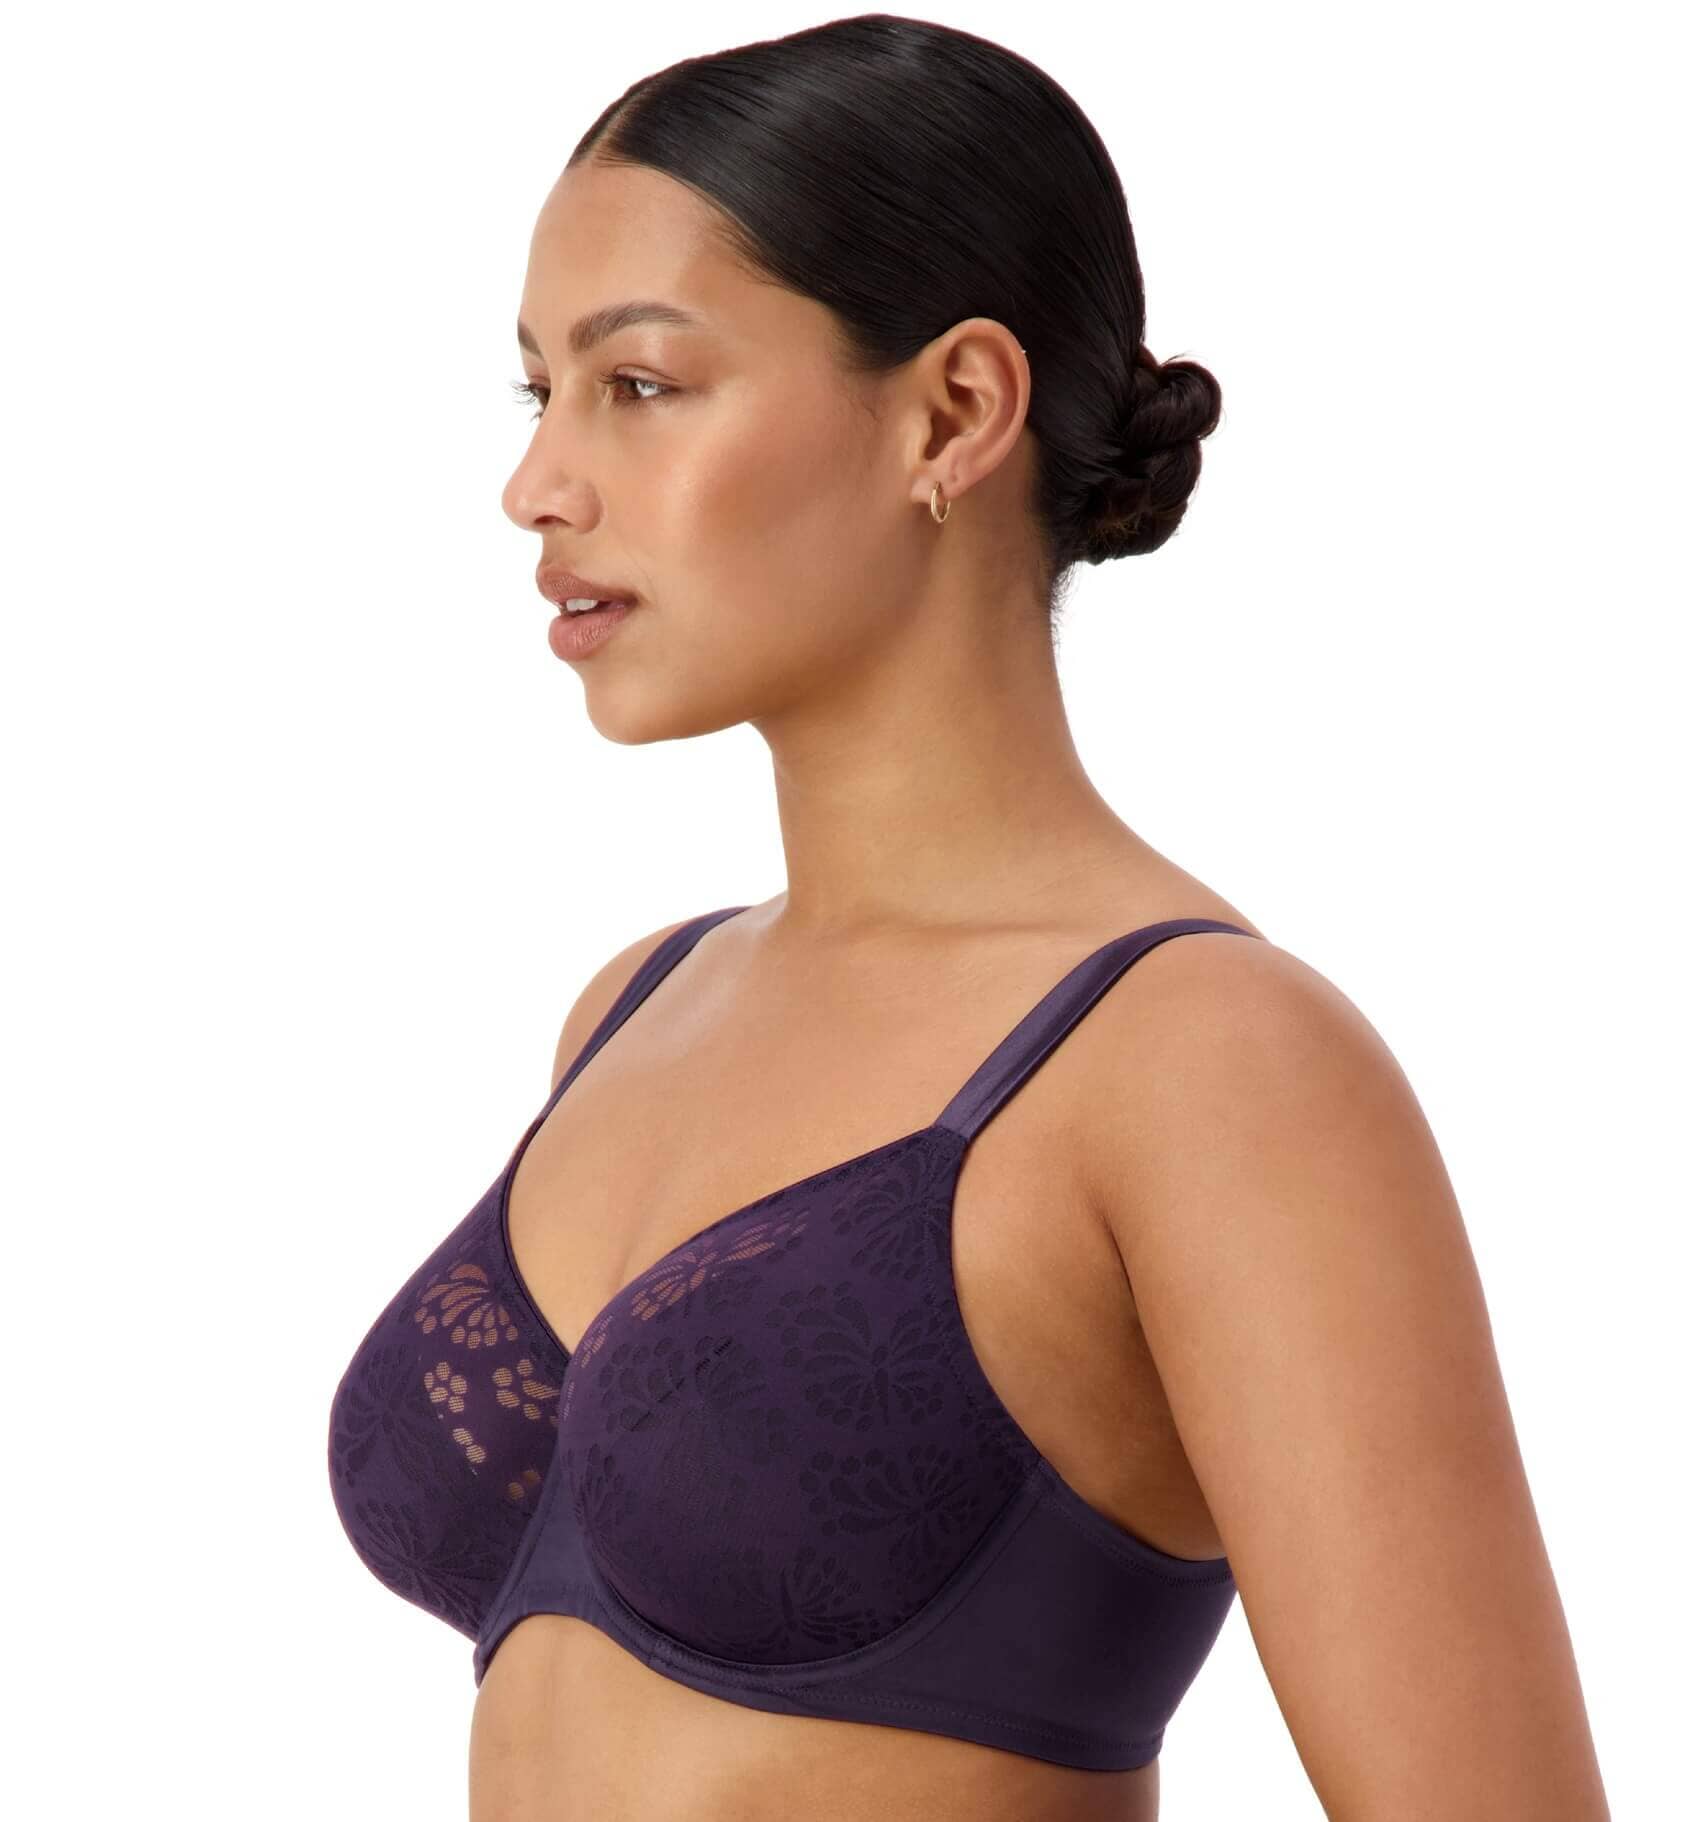 Comfortable Unlined Bralettes and Minimizer Bras